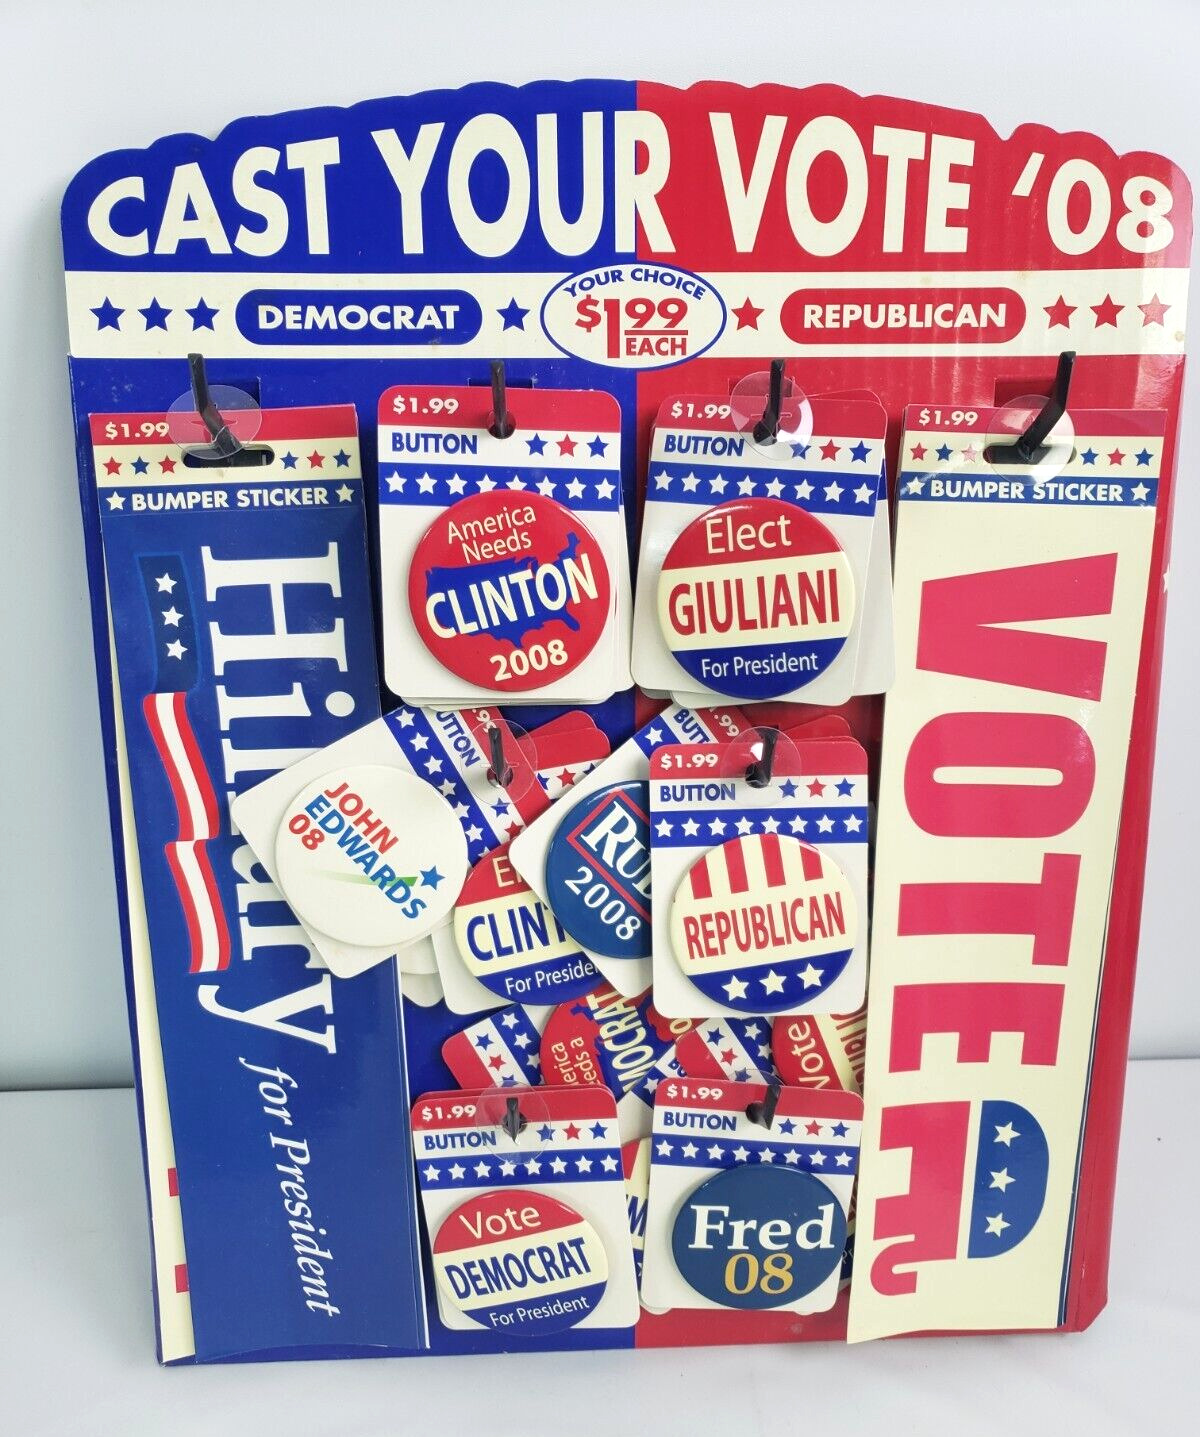 08 Presidential Election Political Campaign Buttons Bumper sticker store display